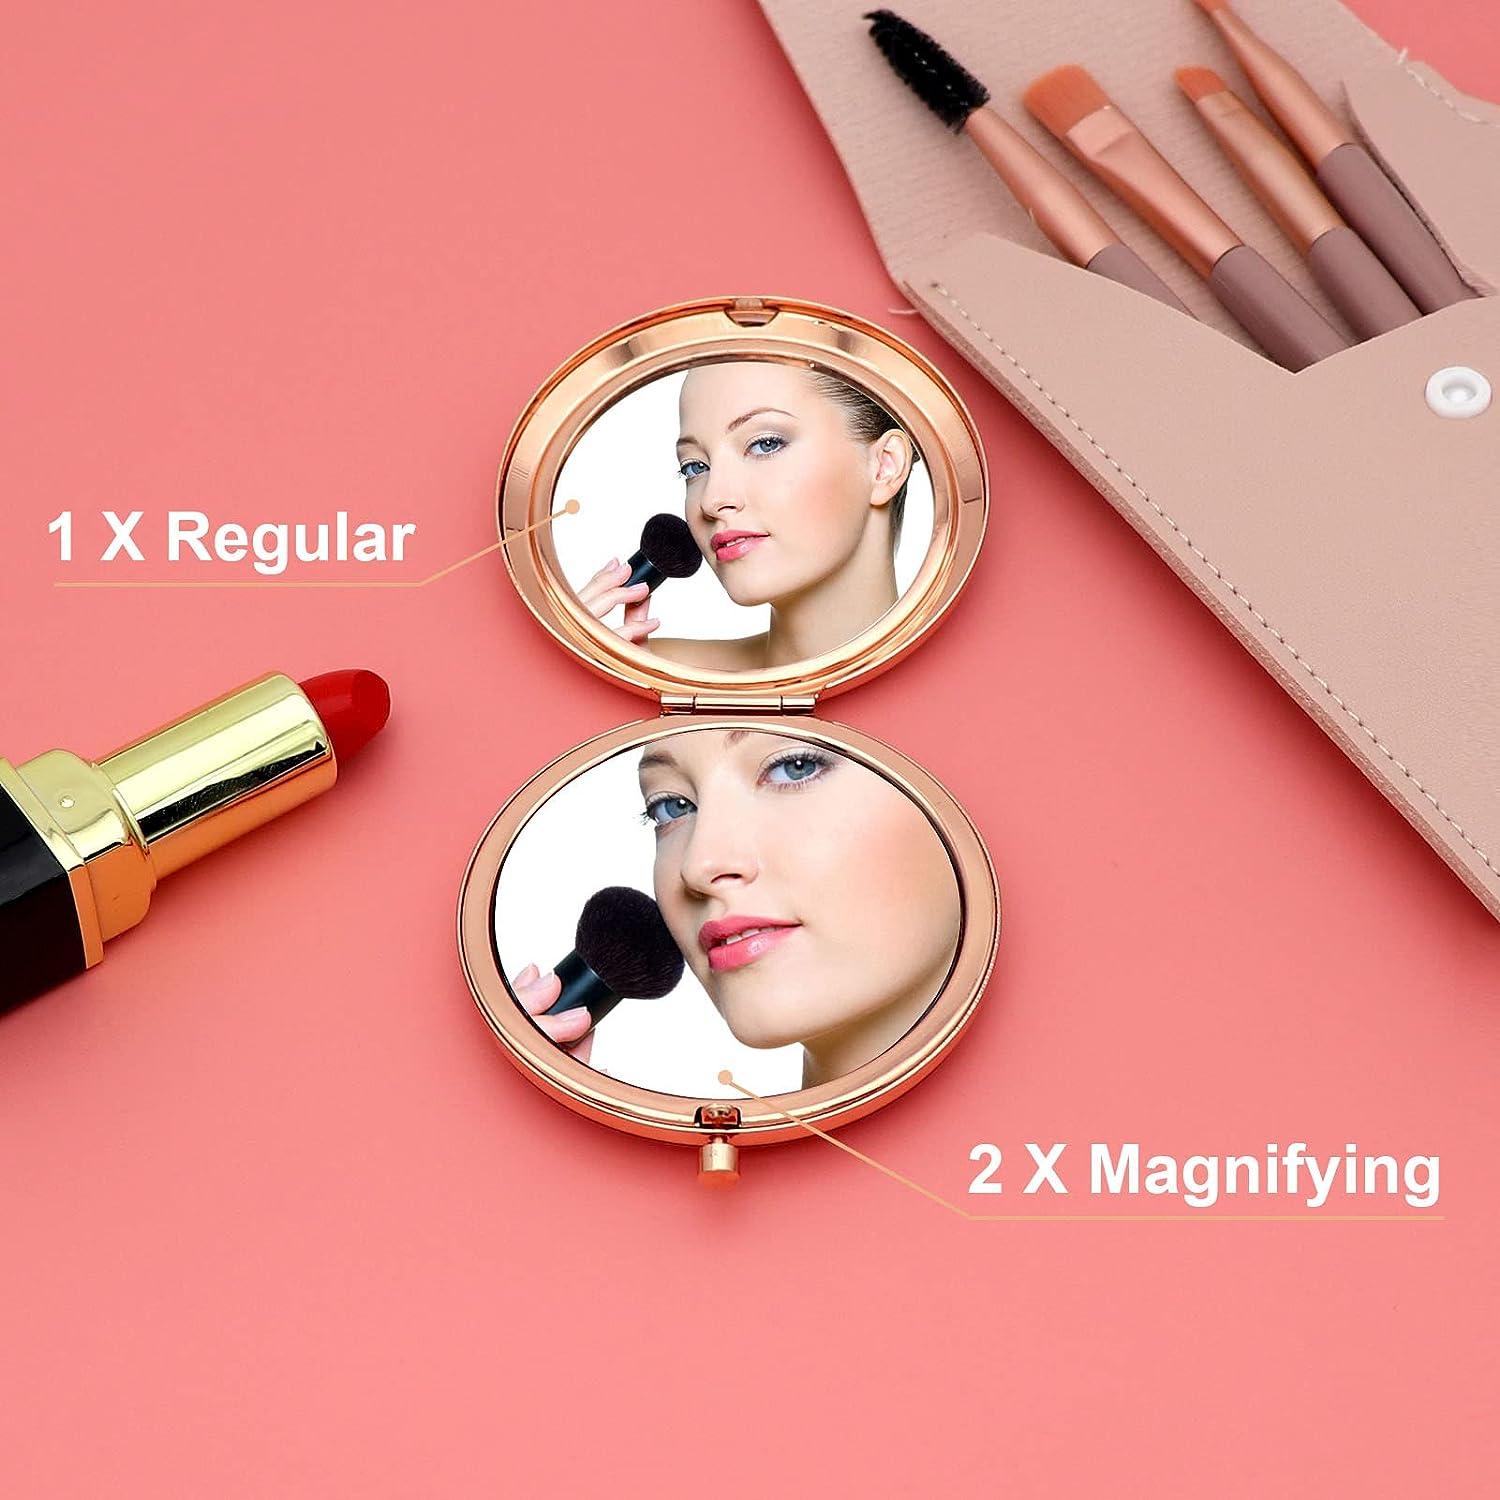 Cawnefil 15 Year Old Girls Gifts for Birthday Rose Gold Travel Compact  Mirror 15th Birthday Gift Ideas for Teen Girl Daughter Niece Happy 15th  Birthday Idea Gift